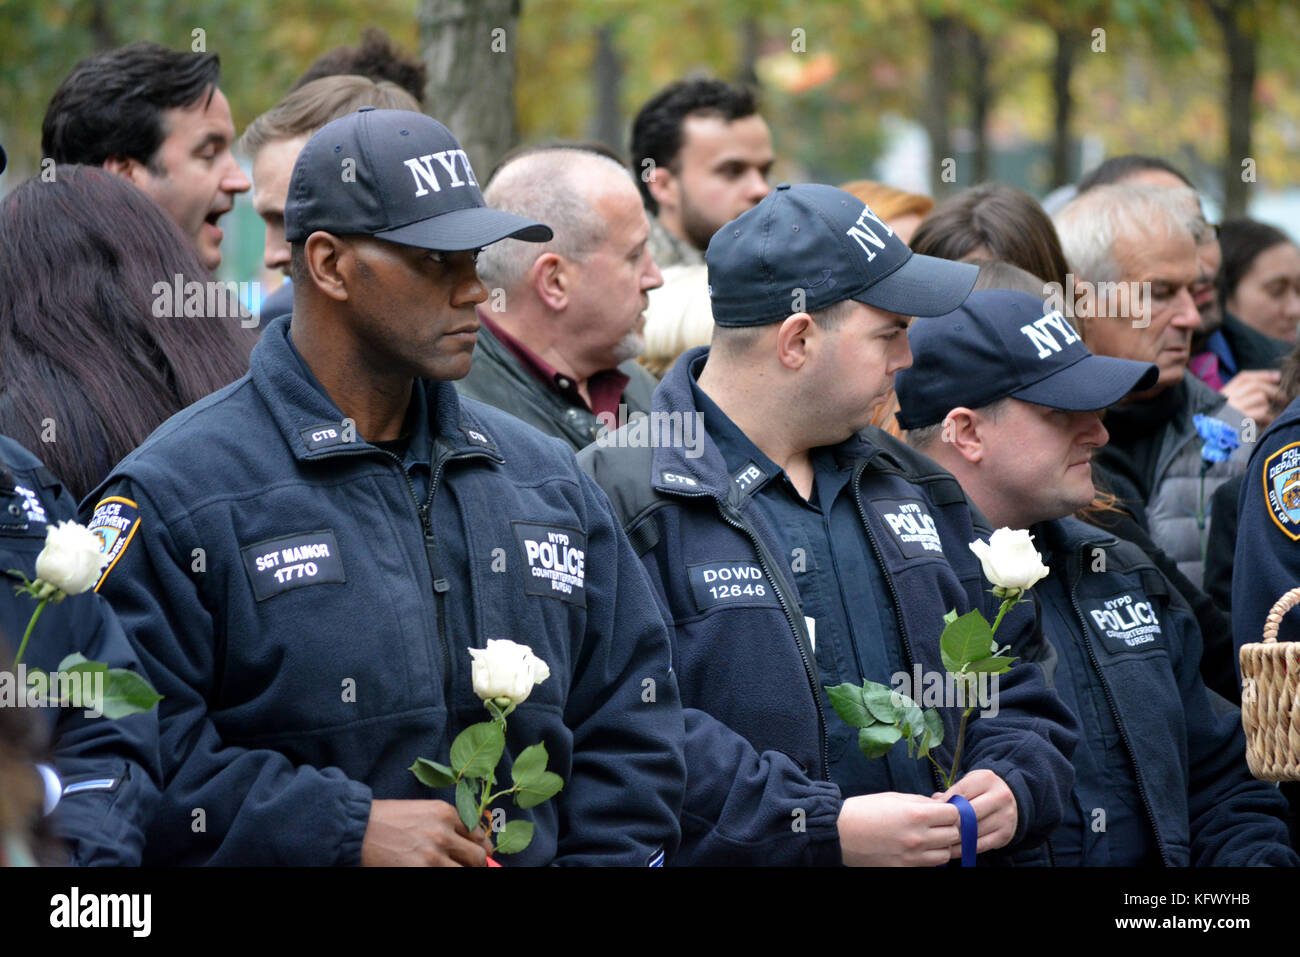 New York City, USA. 1st November, 2017. Police officers taking part in a moment of silence to honor those killed in the terrorist truck attack in Lower Manhattan. Credit: Christopher Penler/Alamy Live News Stock Photo